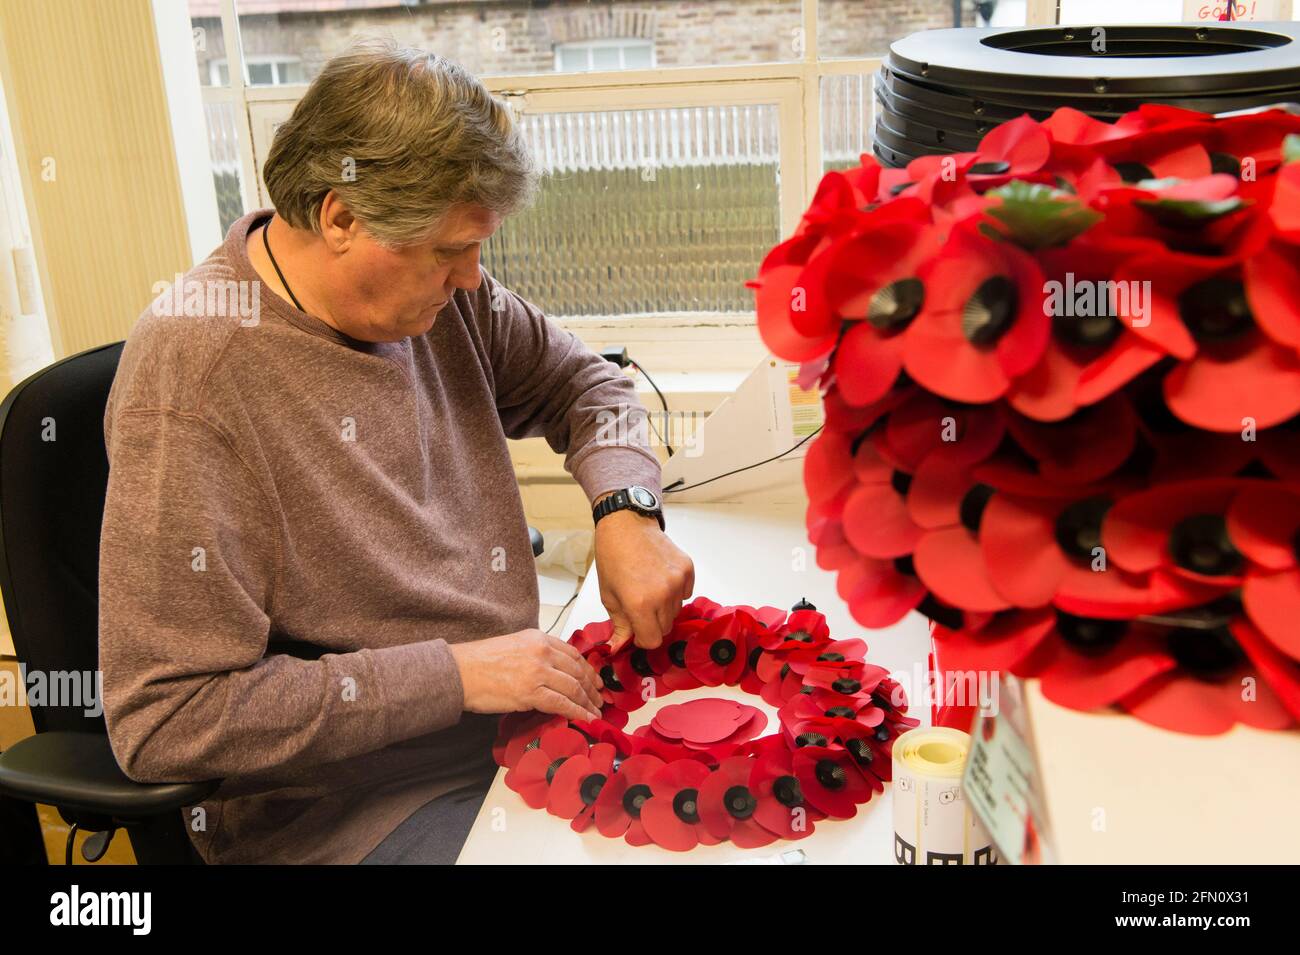 William Sellick making a poppy wreath at, The Royal British Legion's Poppy Factory, 20 Petersham Road, Richmond, London, UK. The Poppy Factory employs ex-service personnel to makes poppies, remembrance crosses, sprays and wreaths for The Royal British Legion’s annual Appeal and Remembrance Day. The Poppy Factory is also responsible for planting and hosting The Field of Remembrance at Westminster Abbey. The Royal British Legion's Poppy Factory, 20 Petersham Road, London, UK.  16 Oct 2013 Stock Photo